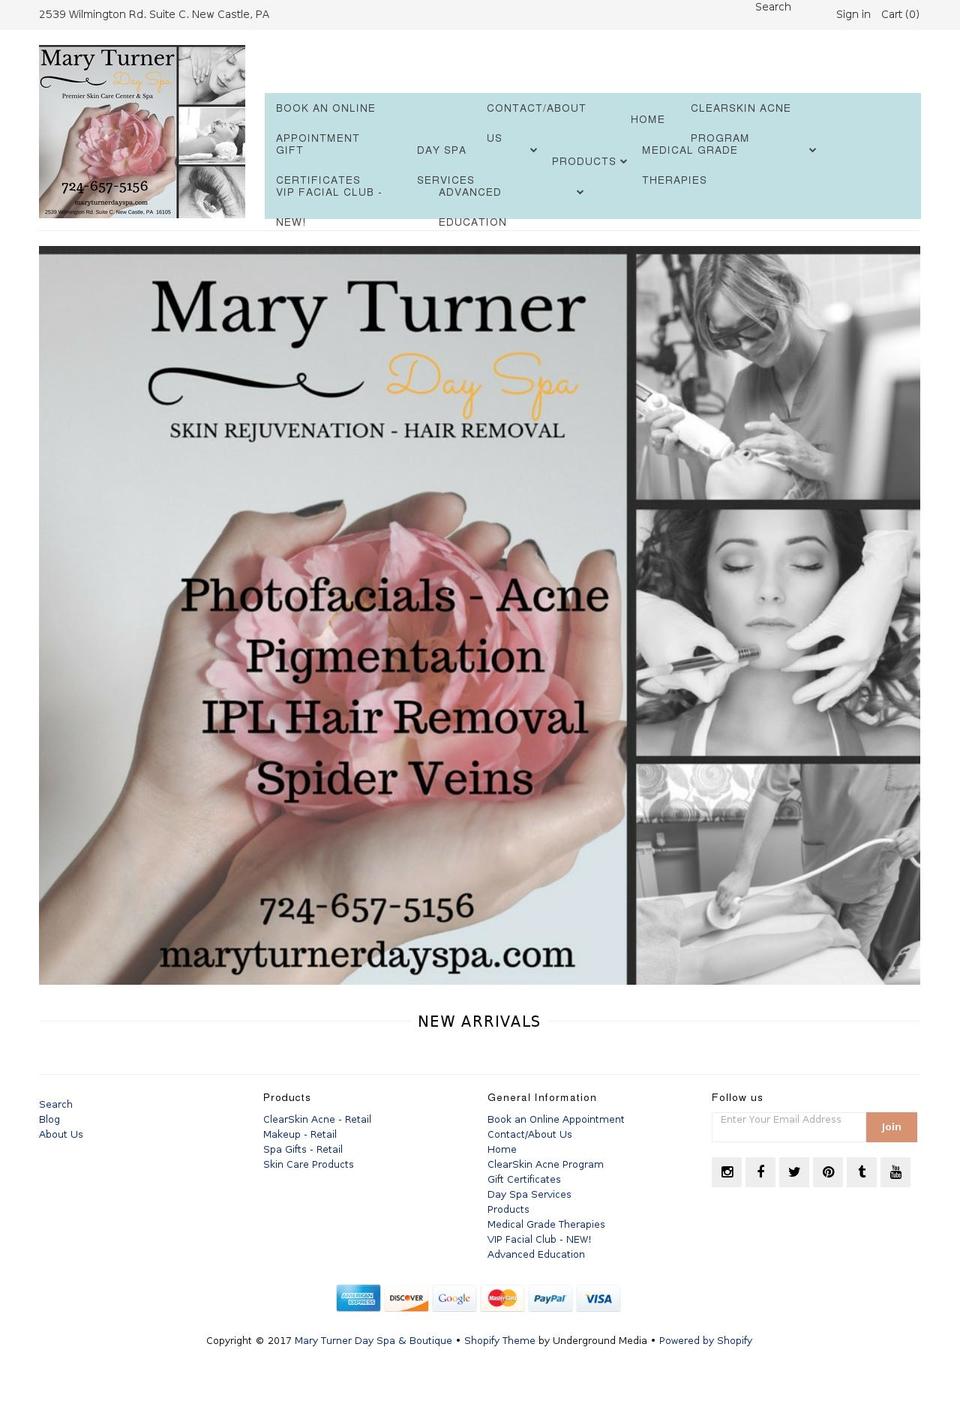 Craft Shopify theme site example maryturnerbeauty.com